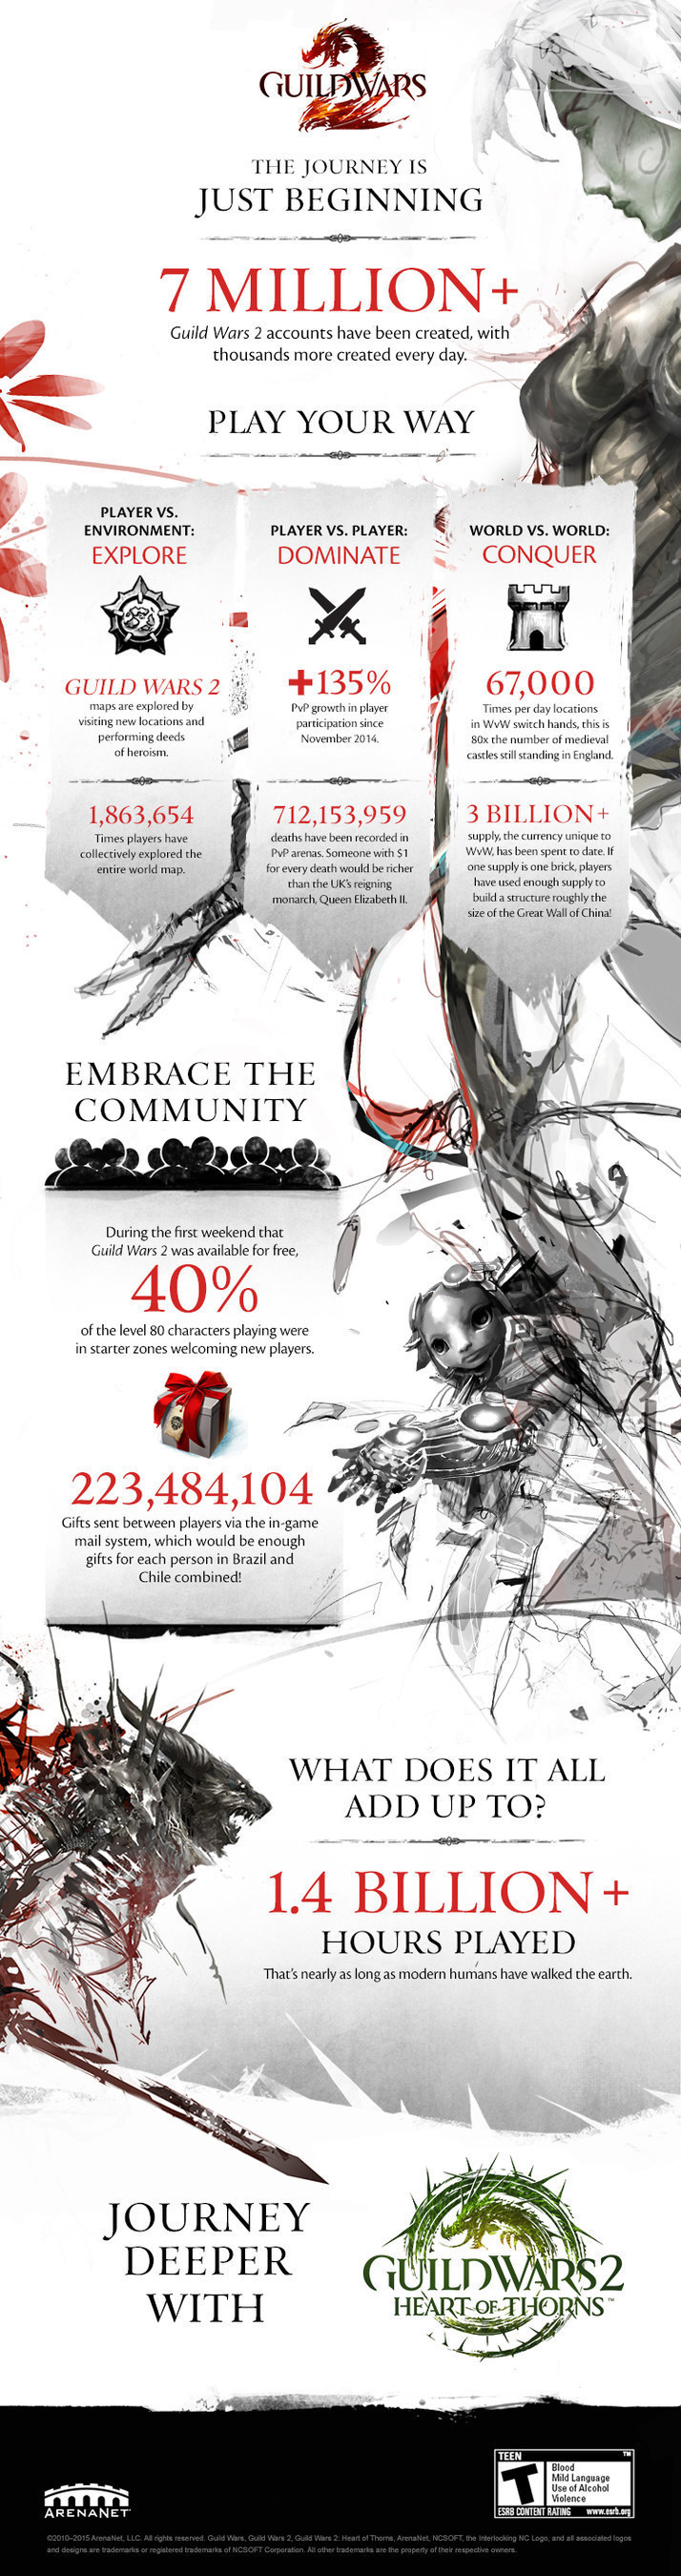 Guild Wars 2 The Journey is Just Beginning Infographic